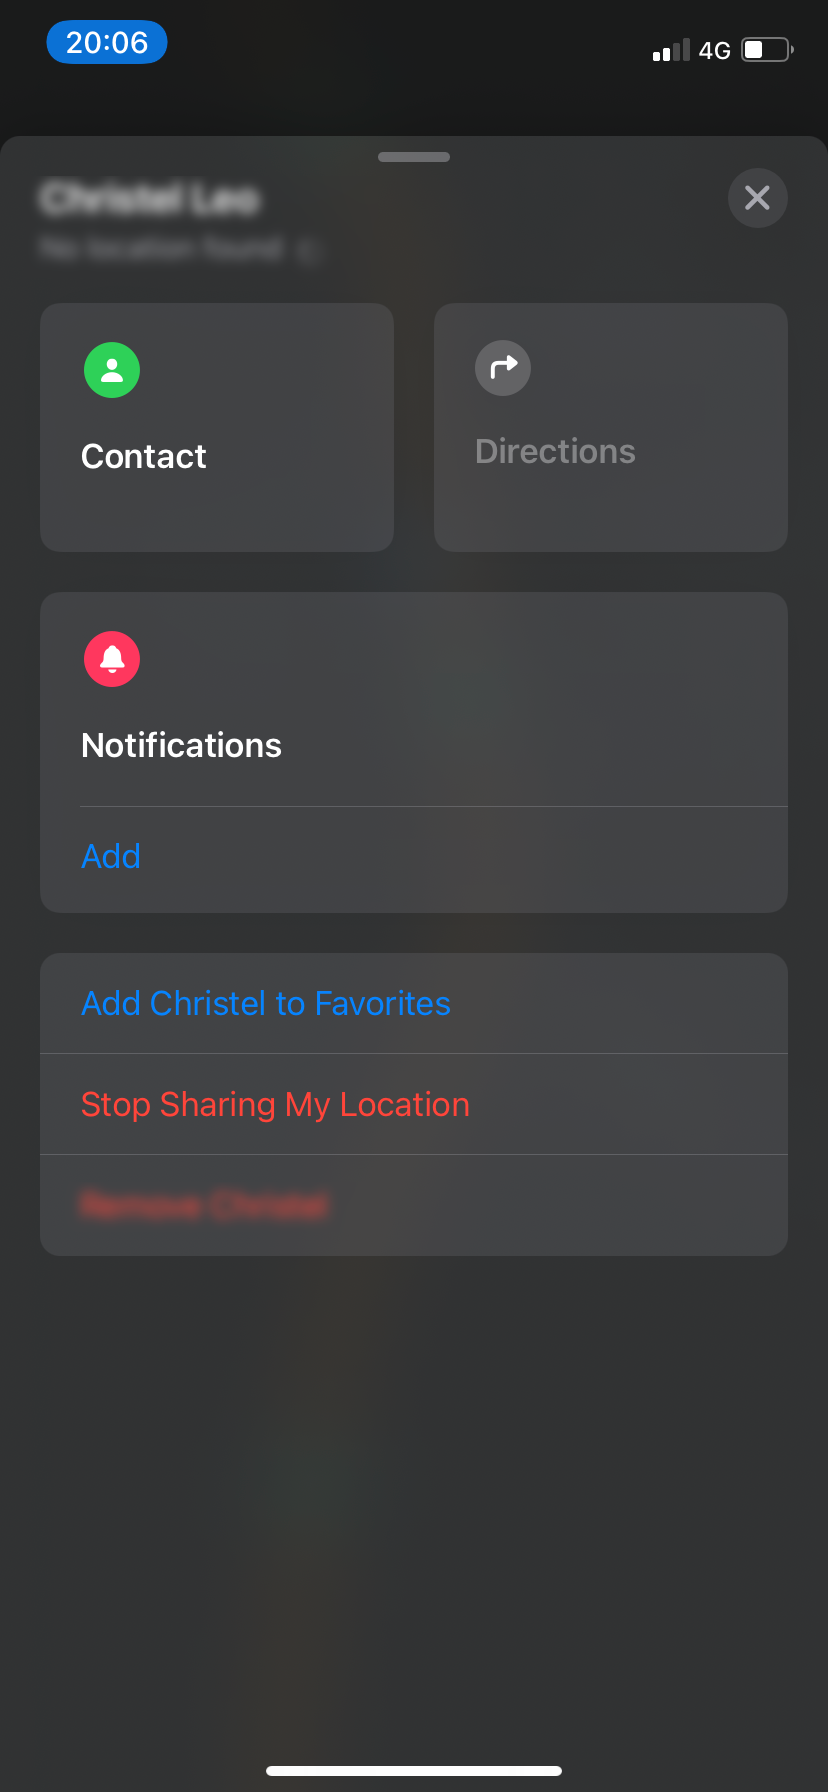 Location sharing options for a contact.